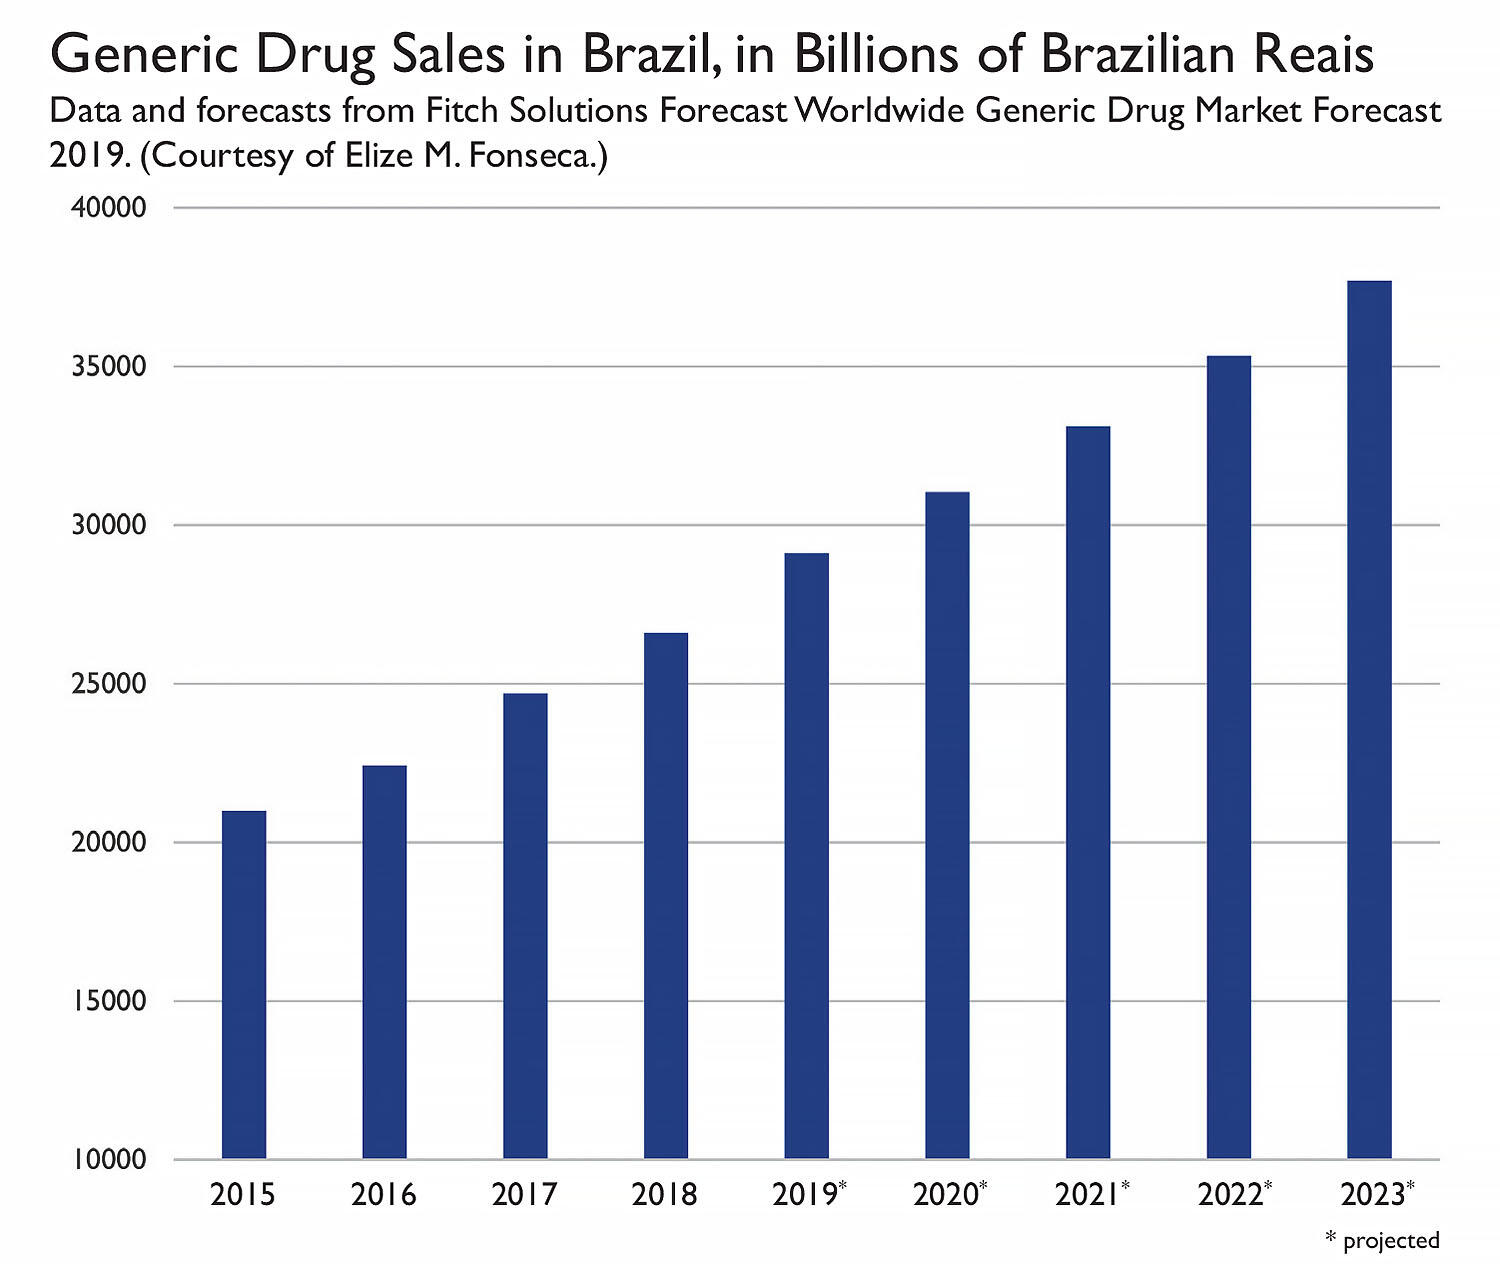 Generic Drug Sales in Brazil, in Billions of Brazilian Reais Data and forecasts from Fitch Solutions Forecast Worldwide Generic Drug Market Forecast 2019. (Courtesy of Elize M. Fonseca.)